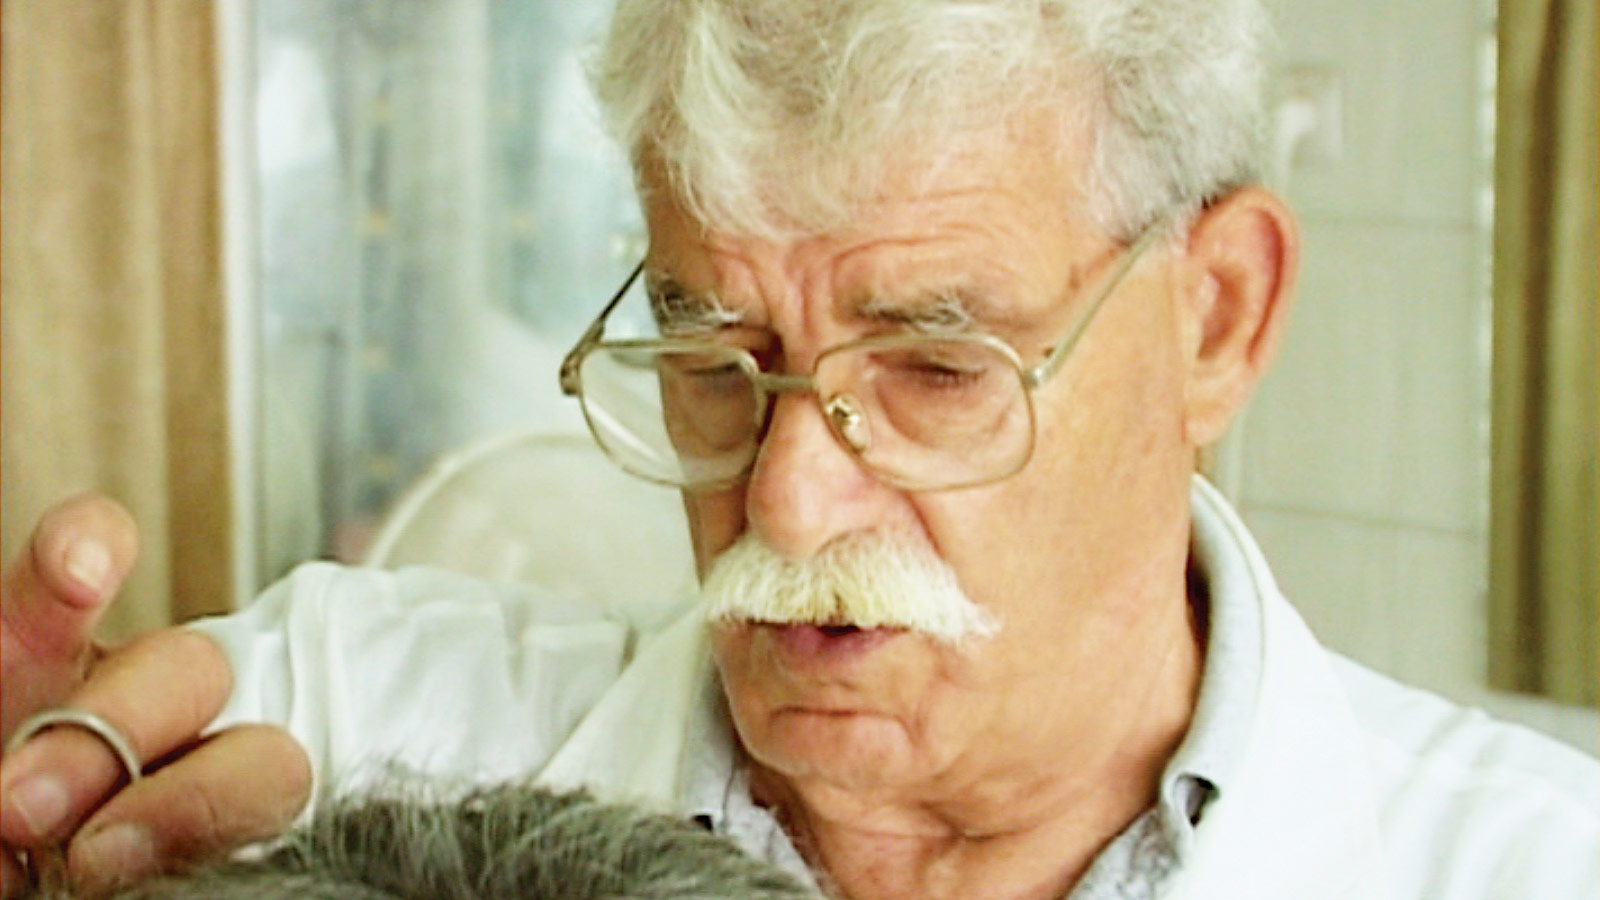 Film still from “Route 181: Extracts from a Palestinian-Israeli Journey,” by Eyal Sivan and Michel Khleifi, two thousand three.